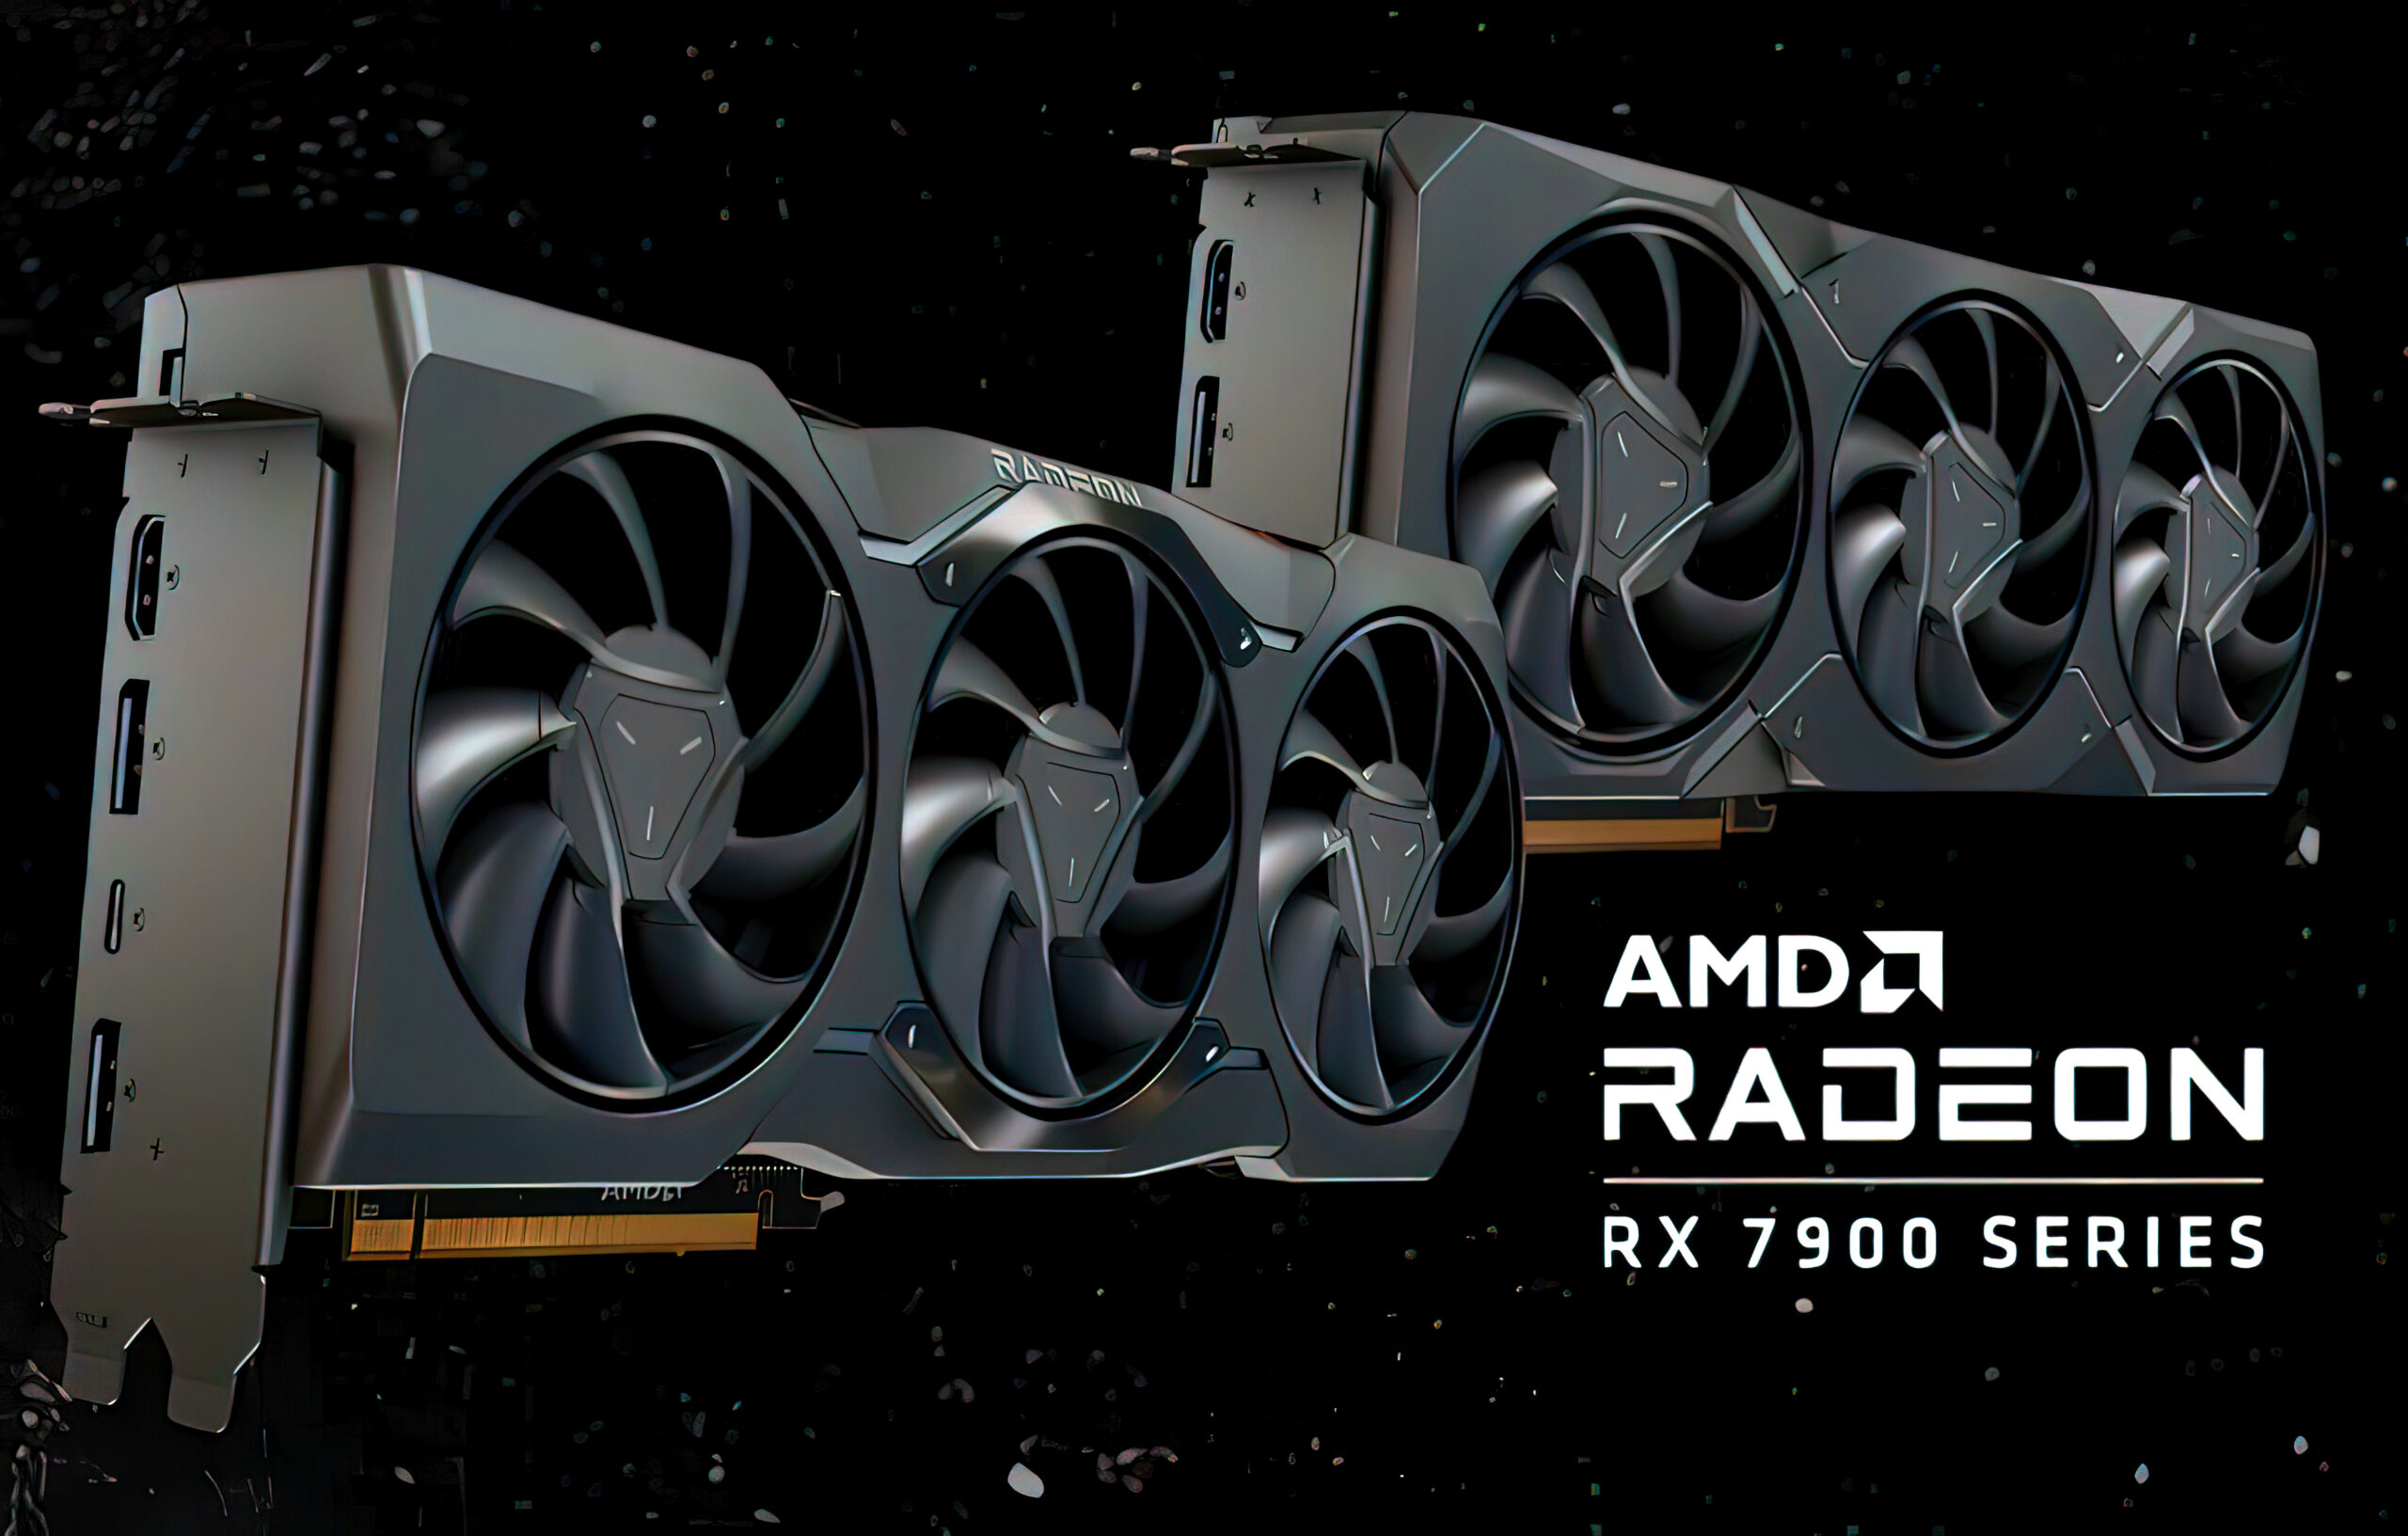 AMD threw their forces into the Radeon RX 7900, but forgot about older graphics cards.  The company’s latest driver only supports Radeon RX 7000